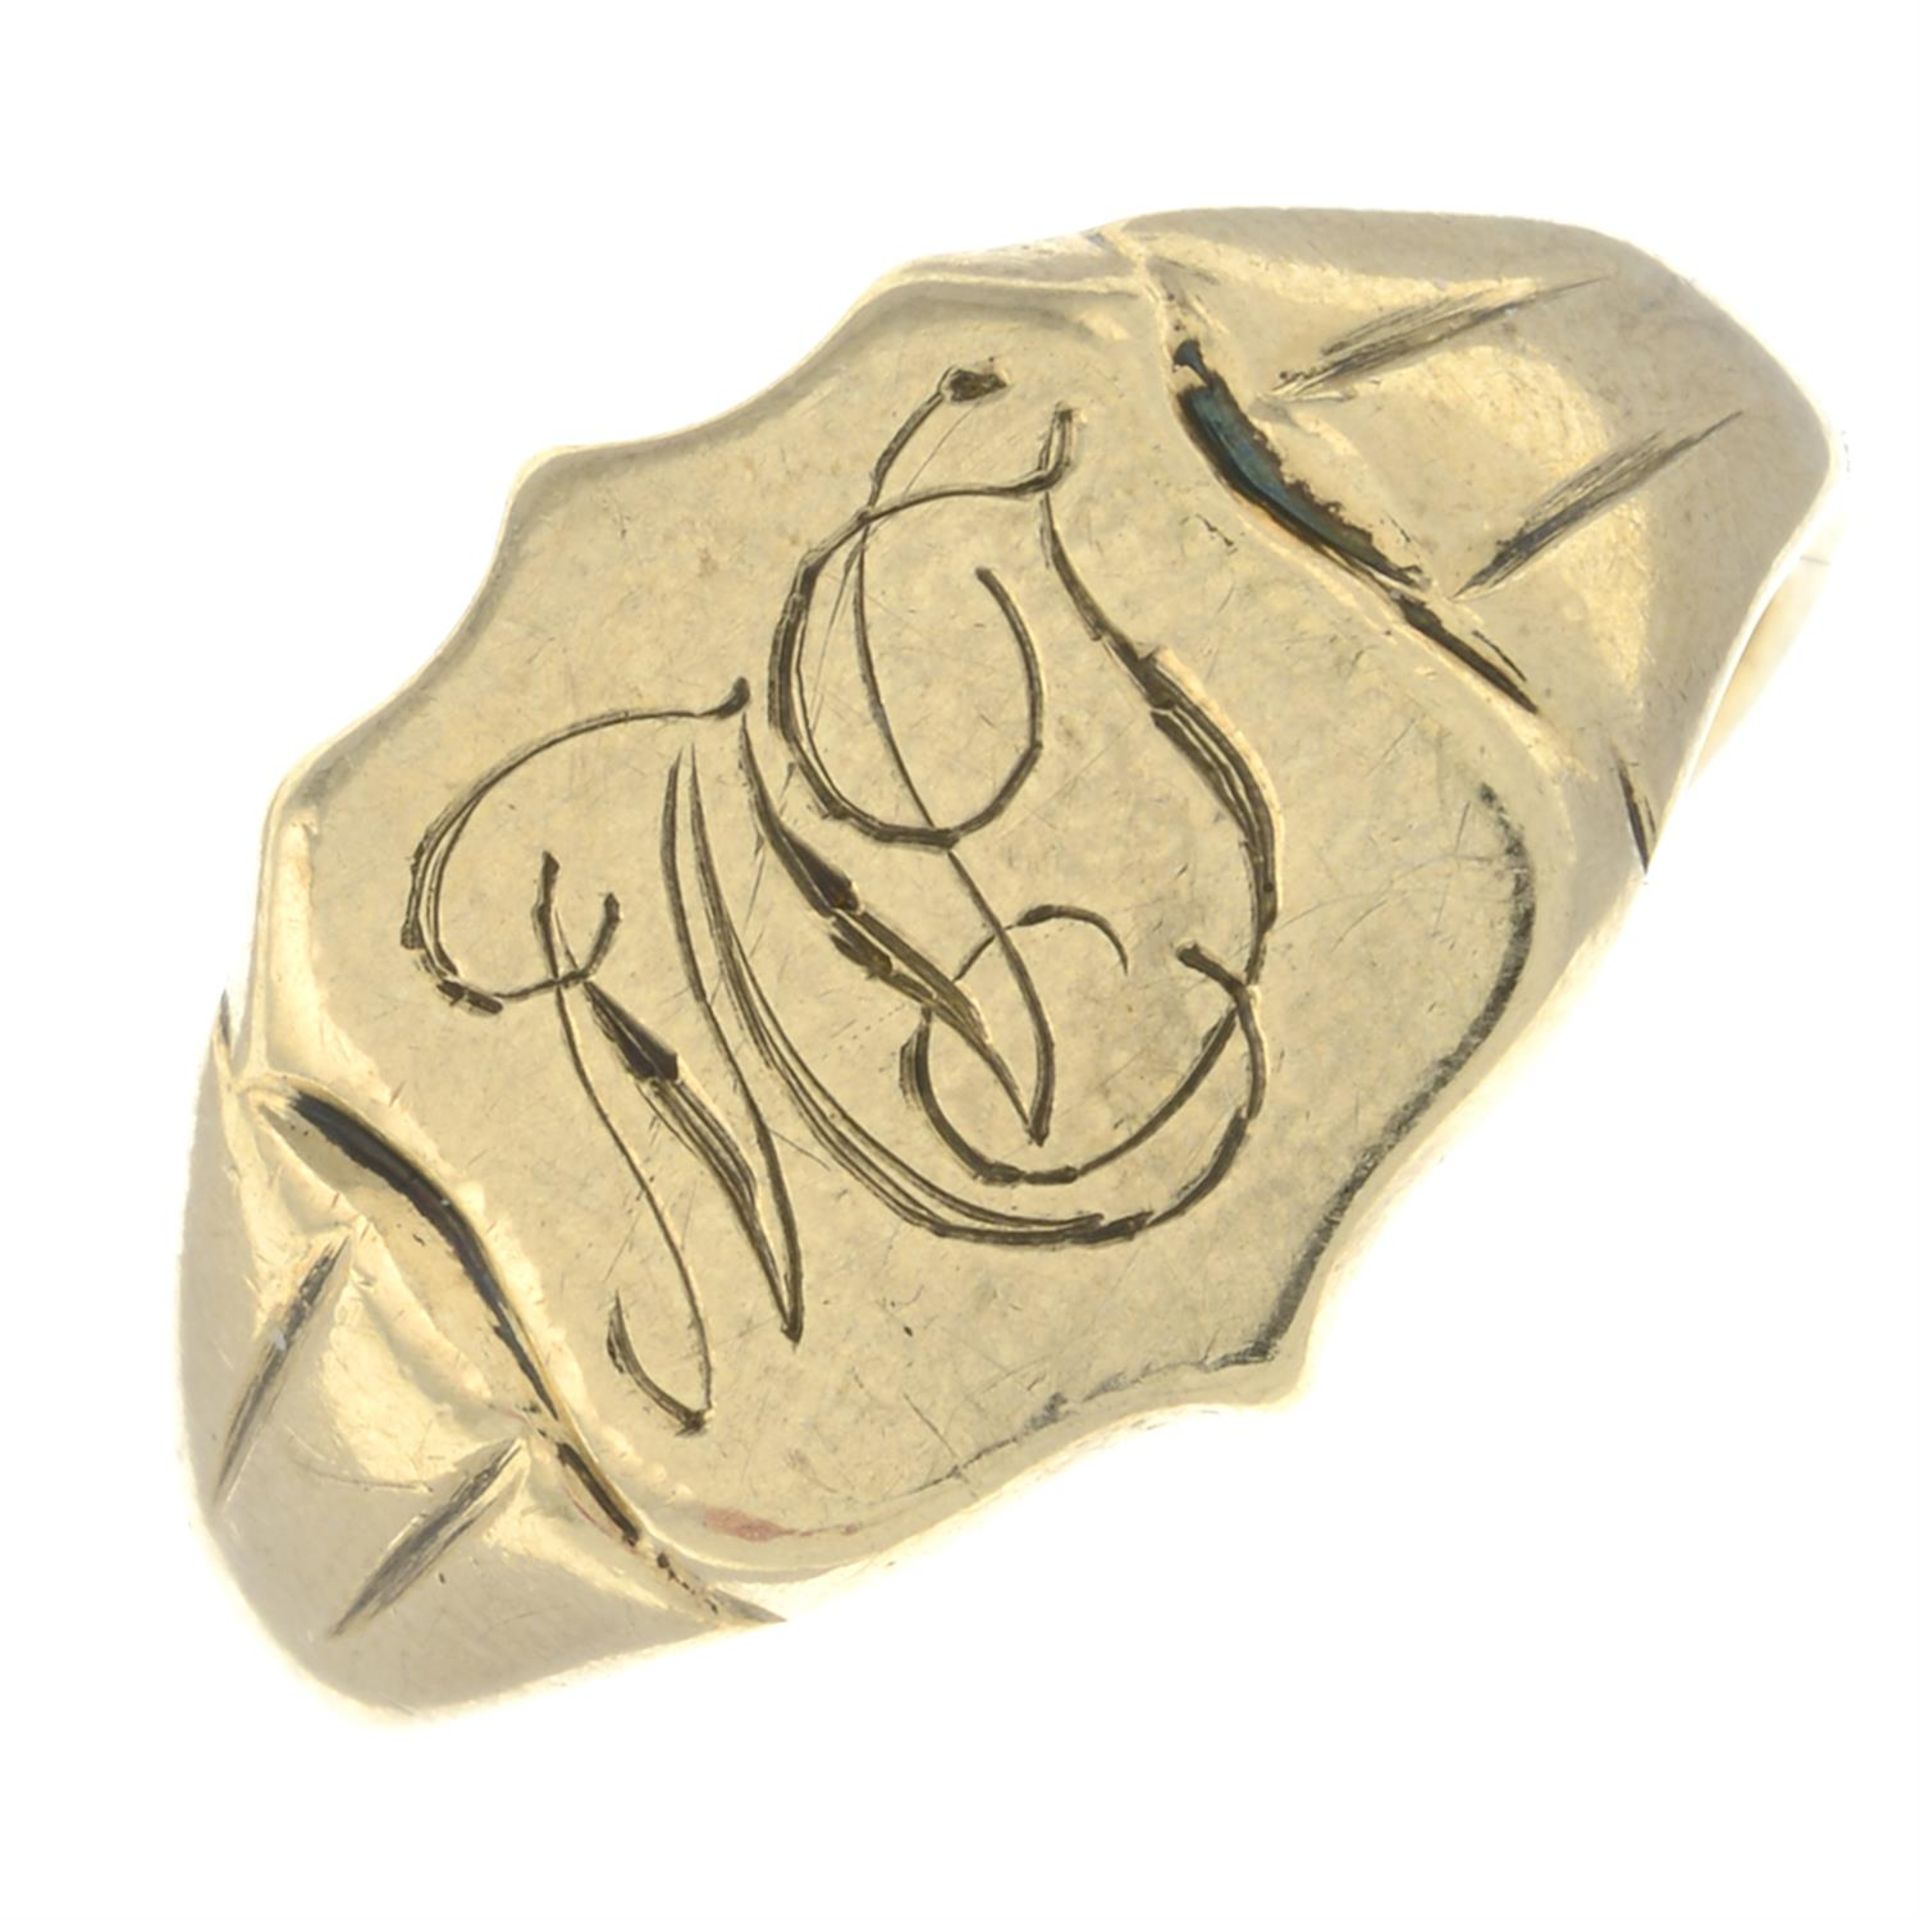 A 1960s 9ct gold shield-shape signet ring, with monogram 'MVJ'.